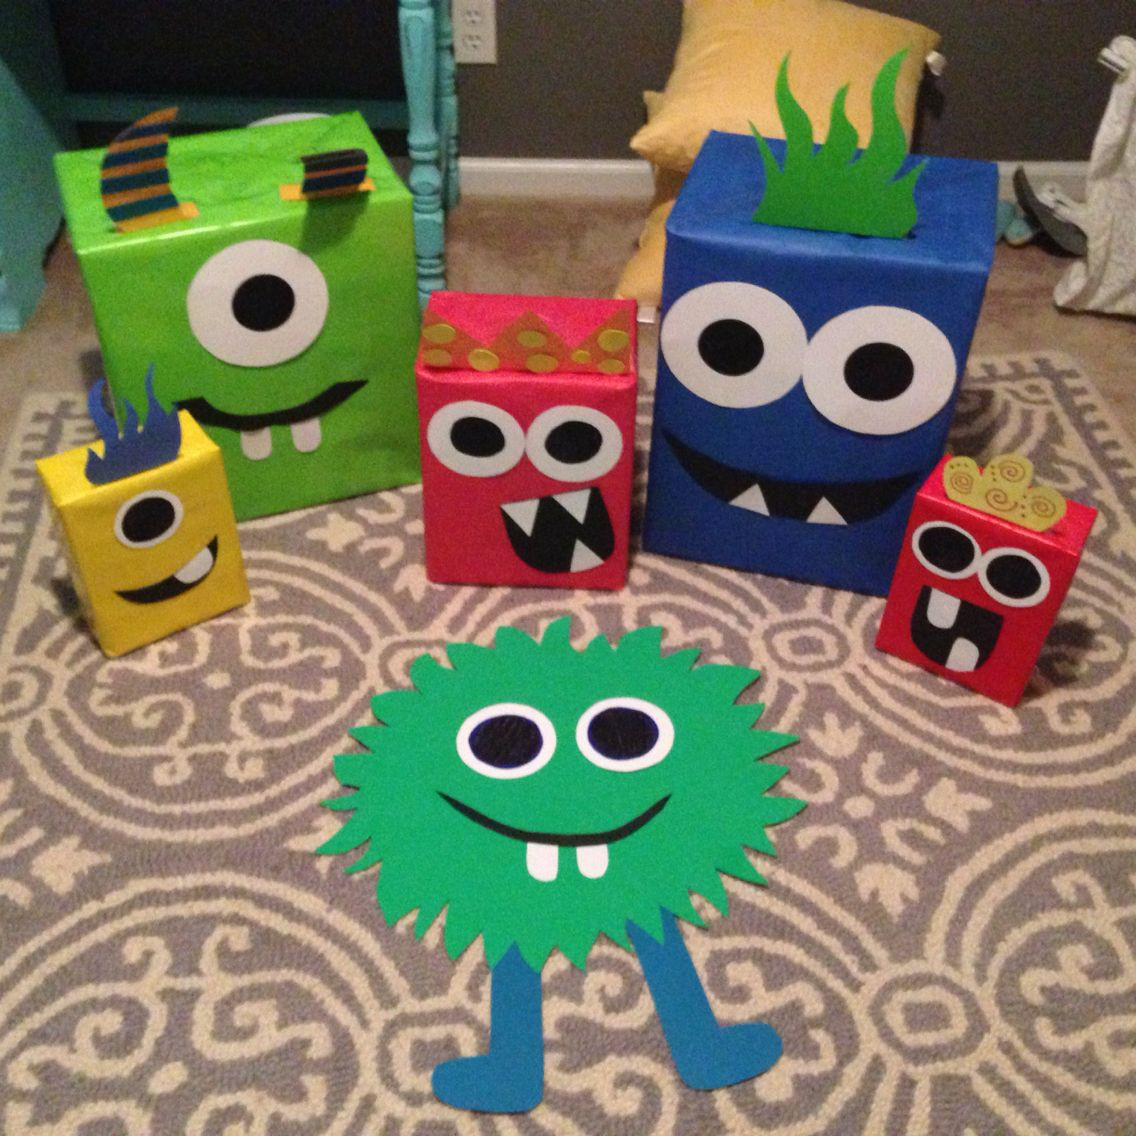 DIY Monster Party Decorations
 DIY Monster Party Decorations Monster Birthday Decor So